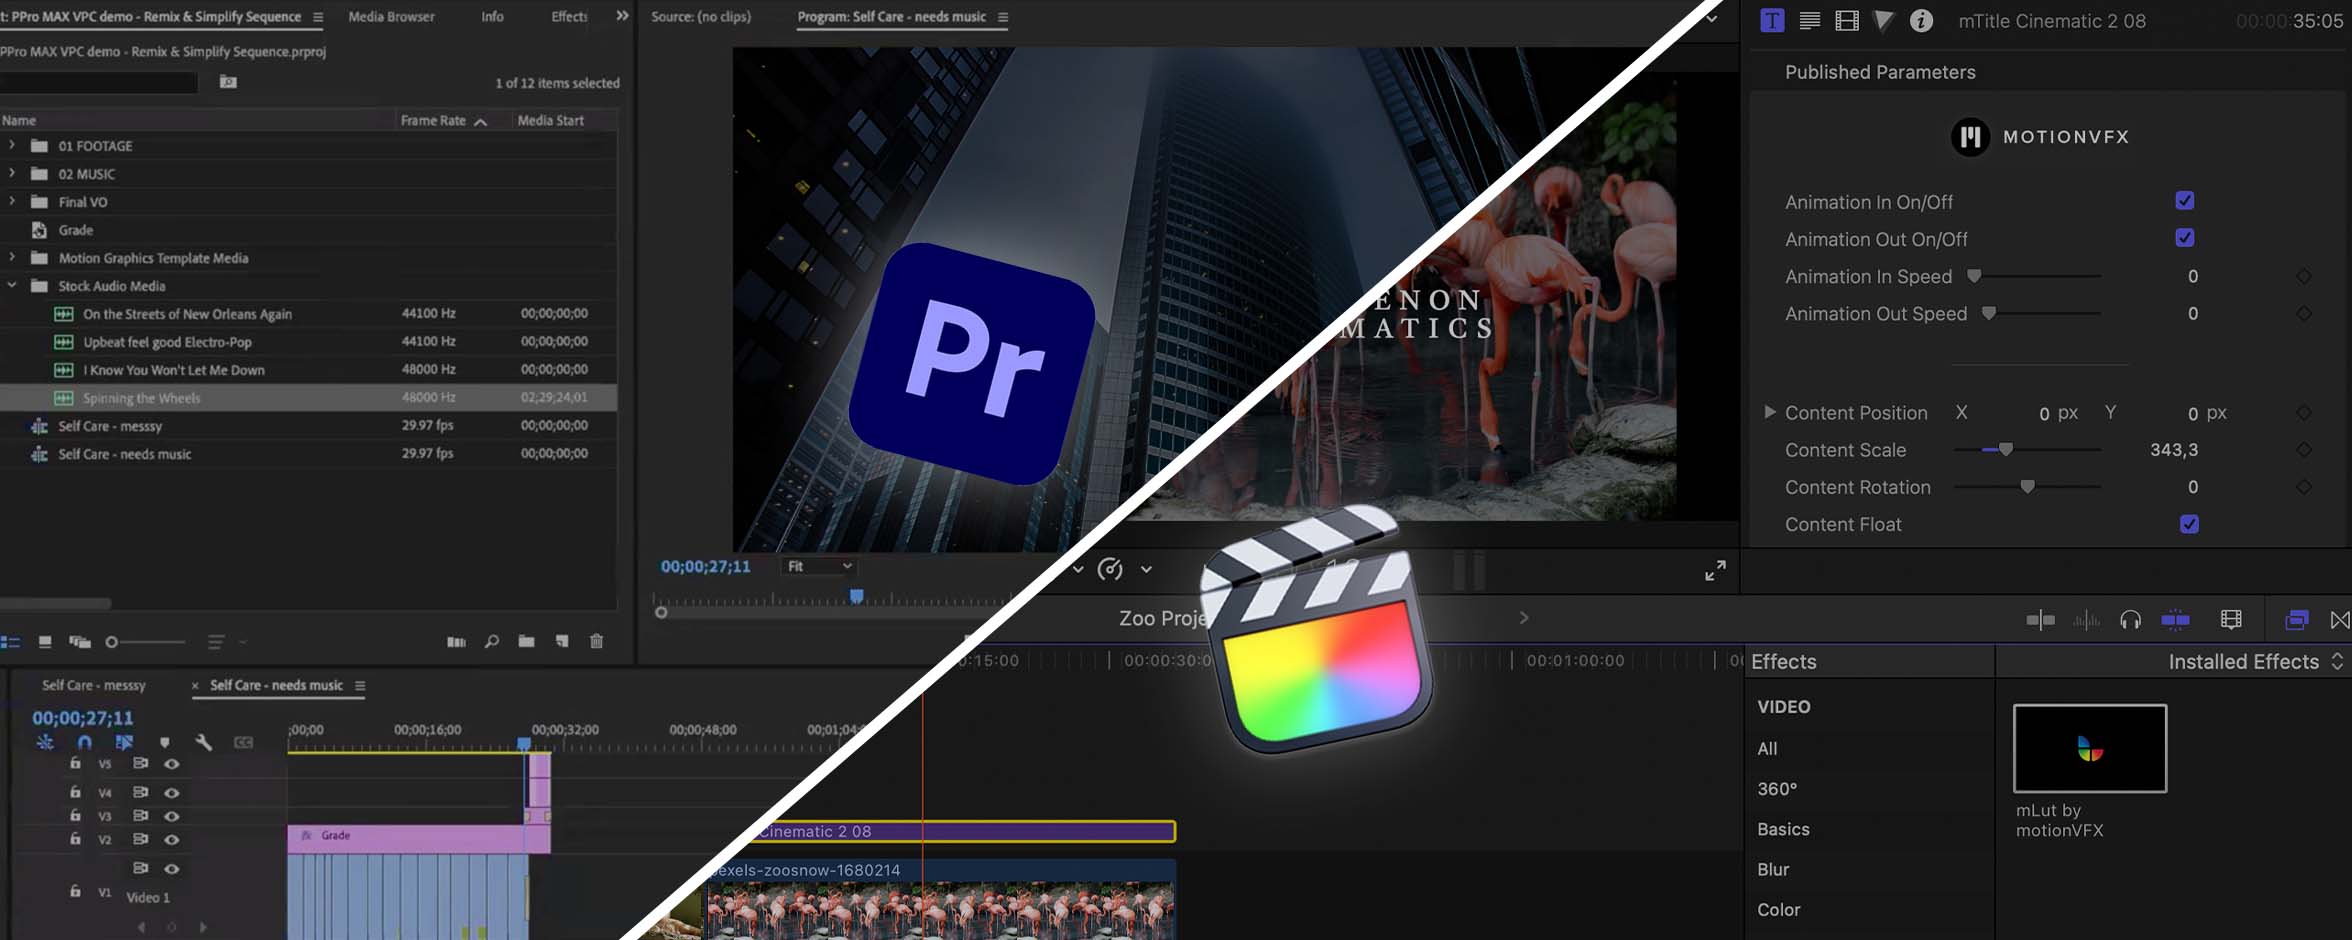 What’s so special about Final Cut Pro anyway?